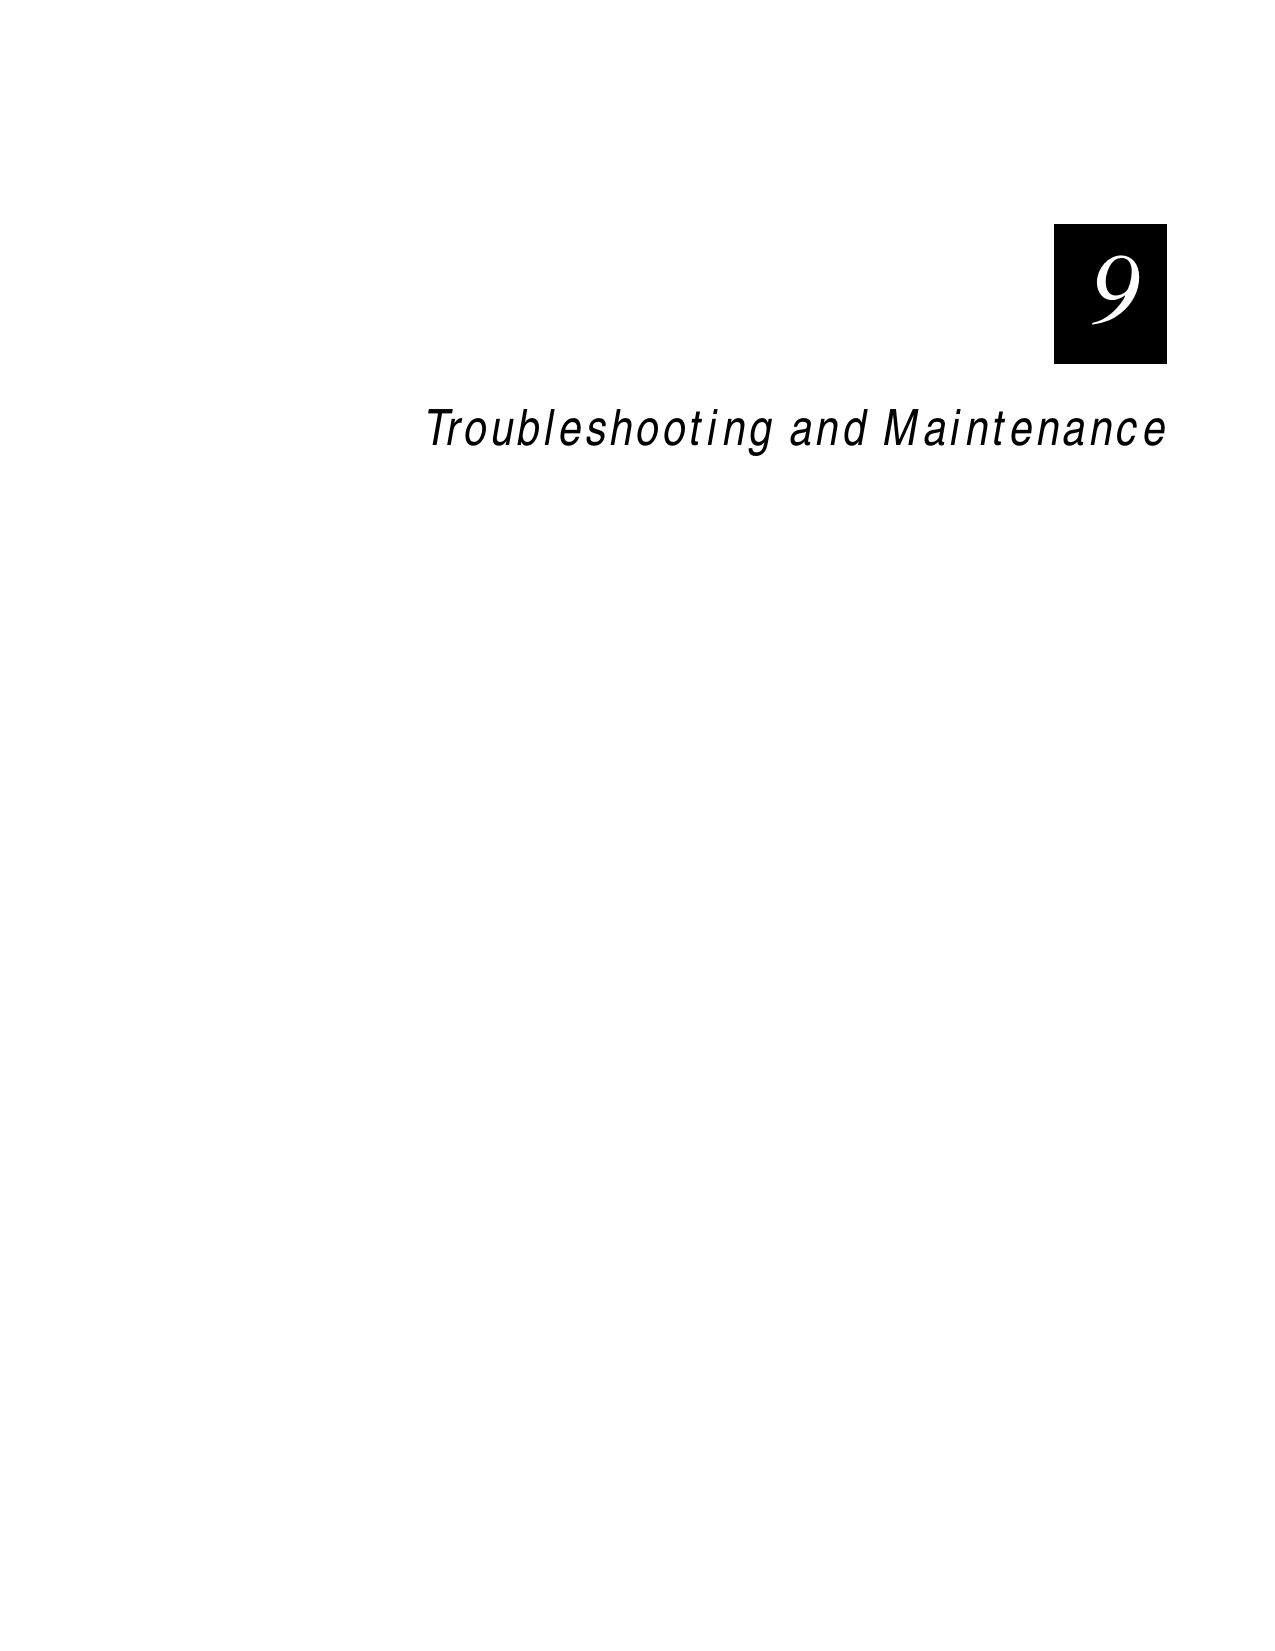  9Troubleshooting and Maintenance